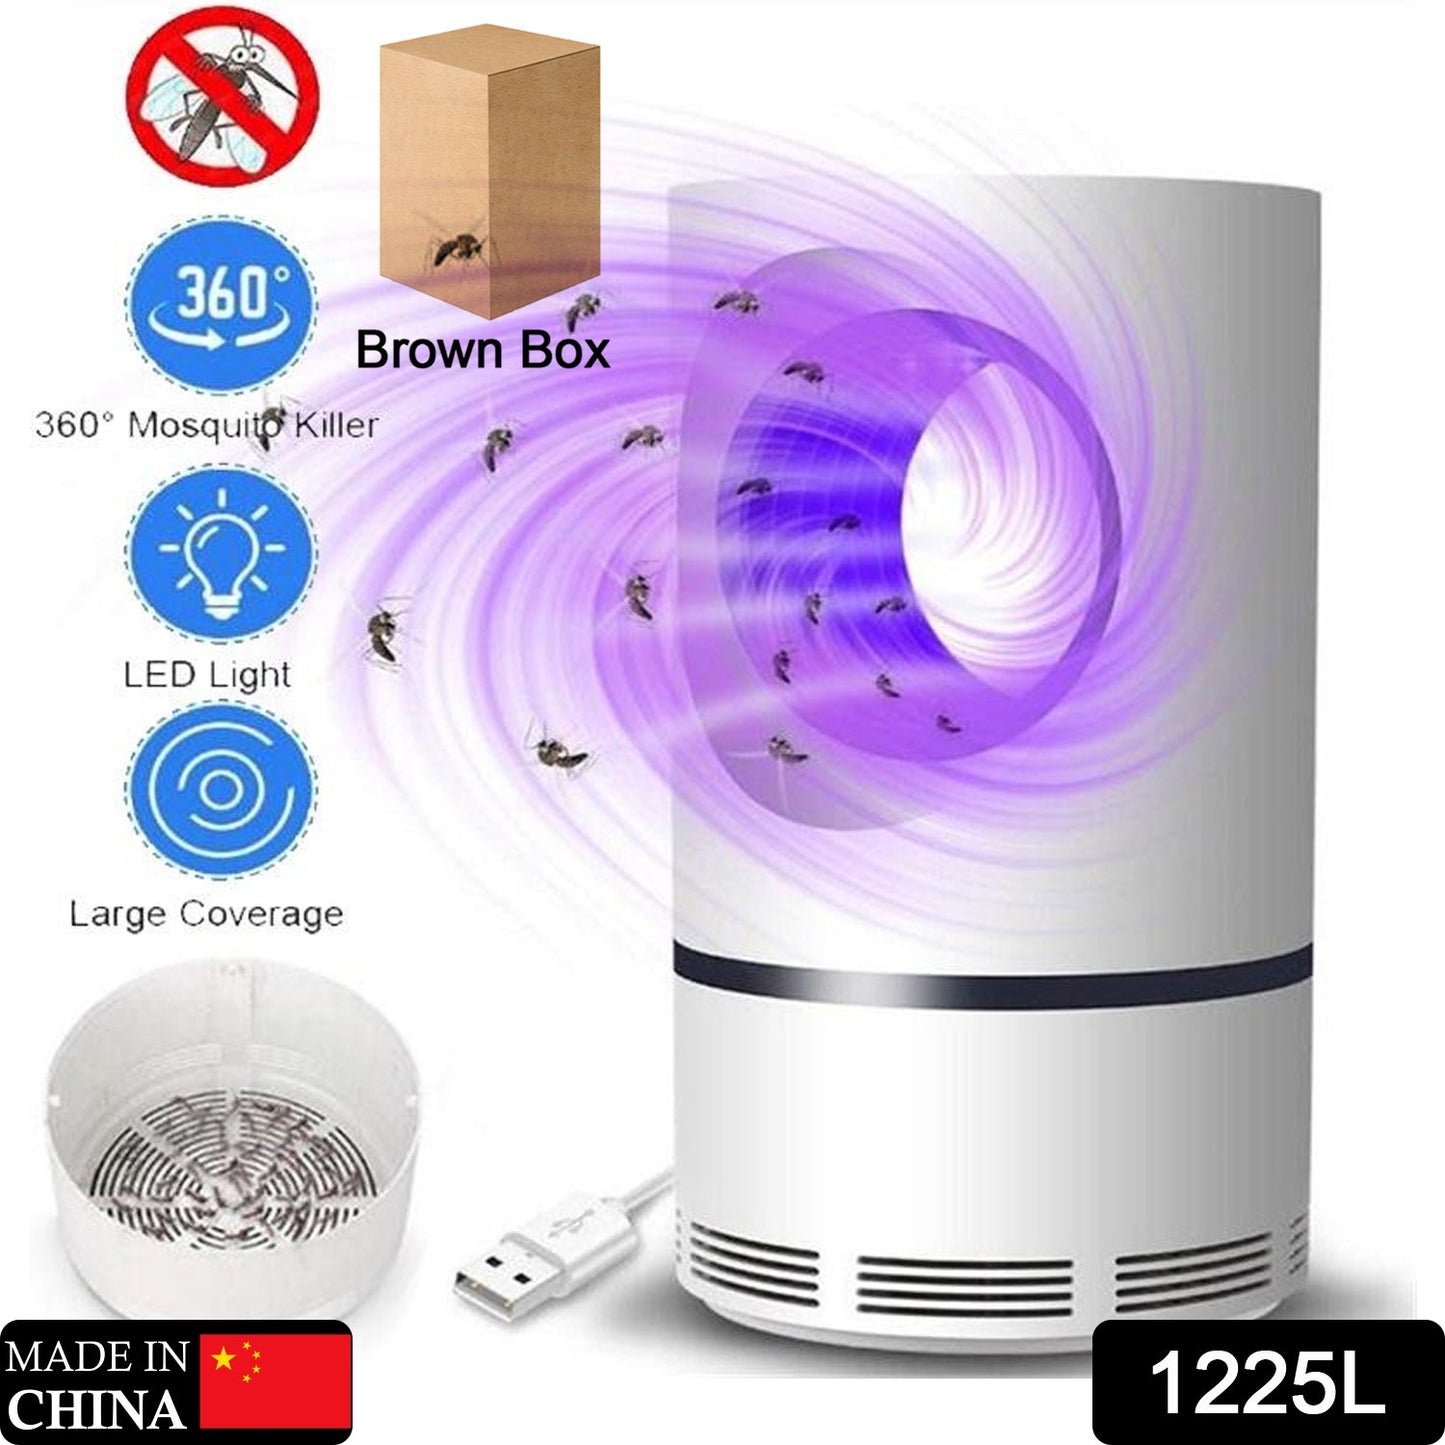 1225L Electronic Led Mosquito Killer Lamps Machine for Home Insect Killer Electric Powered Machine Eco-Friendly Baby Freezer, Household Bin Display Rack 